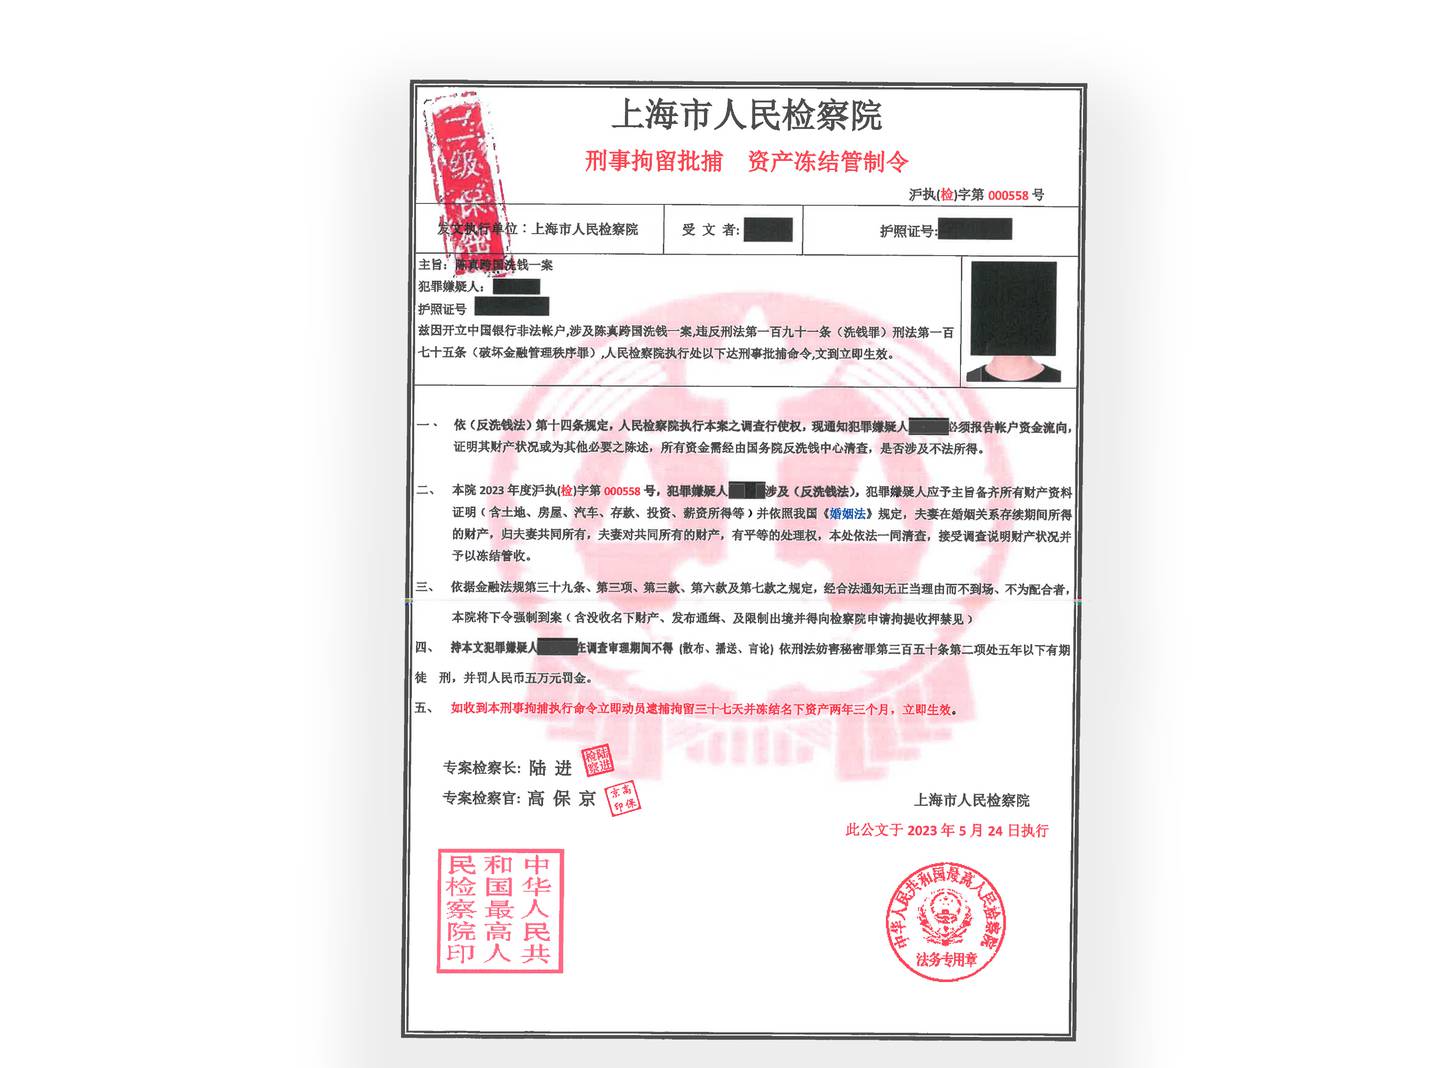 The scammers used fake Chinese arrest warrants to implicate fraud victims in foreign money laundering crimes in order to extort large sums of money.